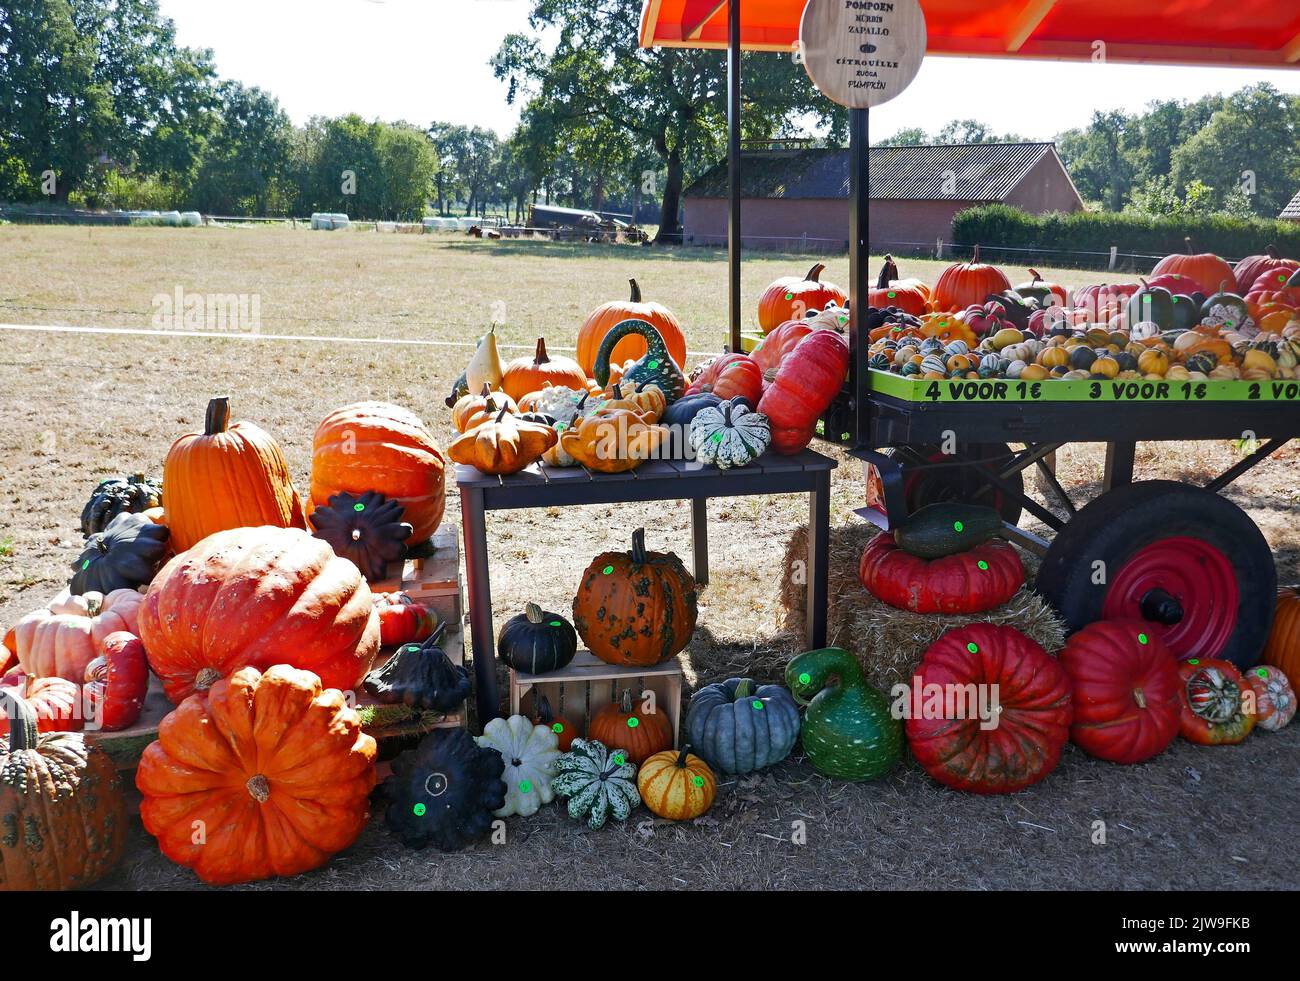 A pumpkin sales booth in the Netherlands. The selling is based on trust. The prices are on the pumpkins and there is a piggy-bank to put the money in. Stock Photo